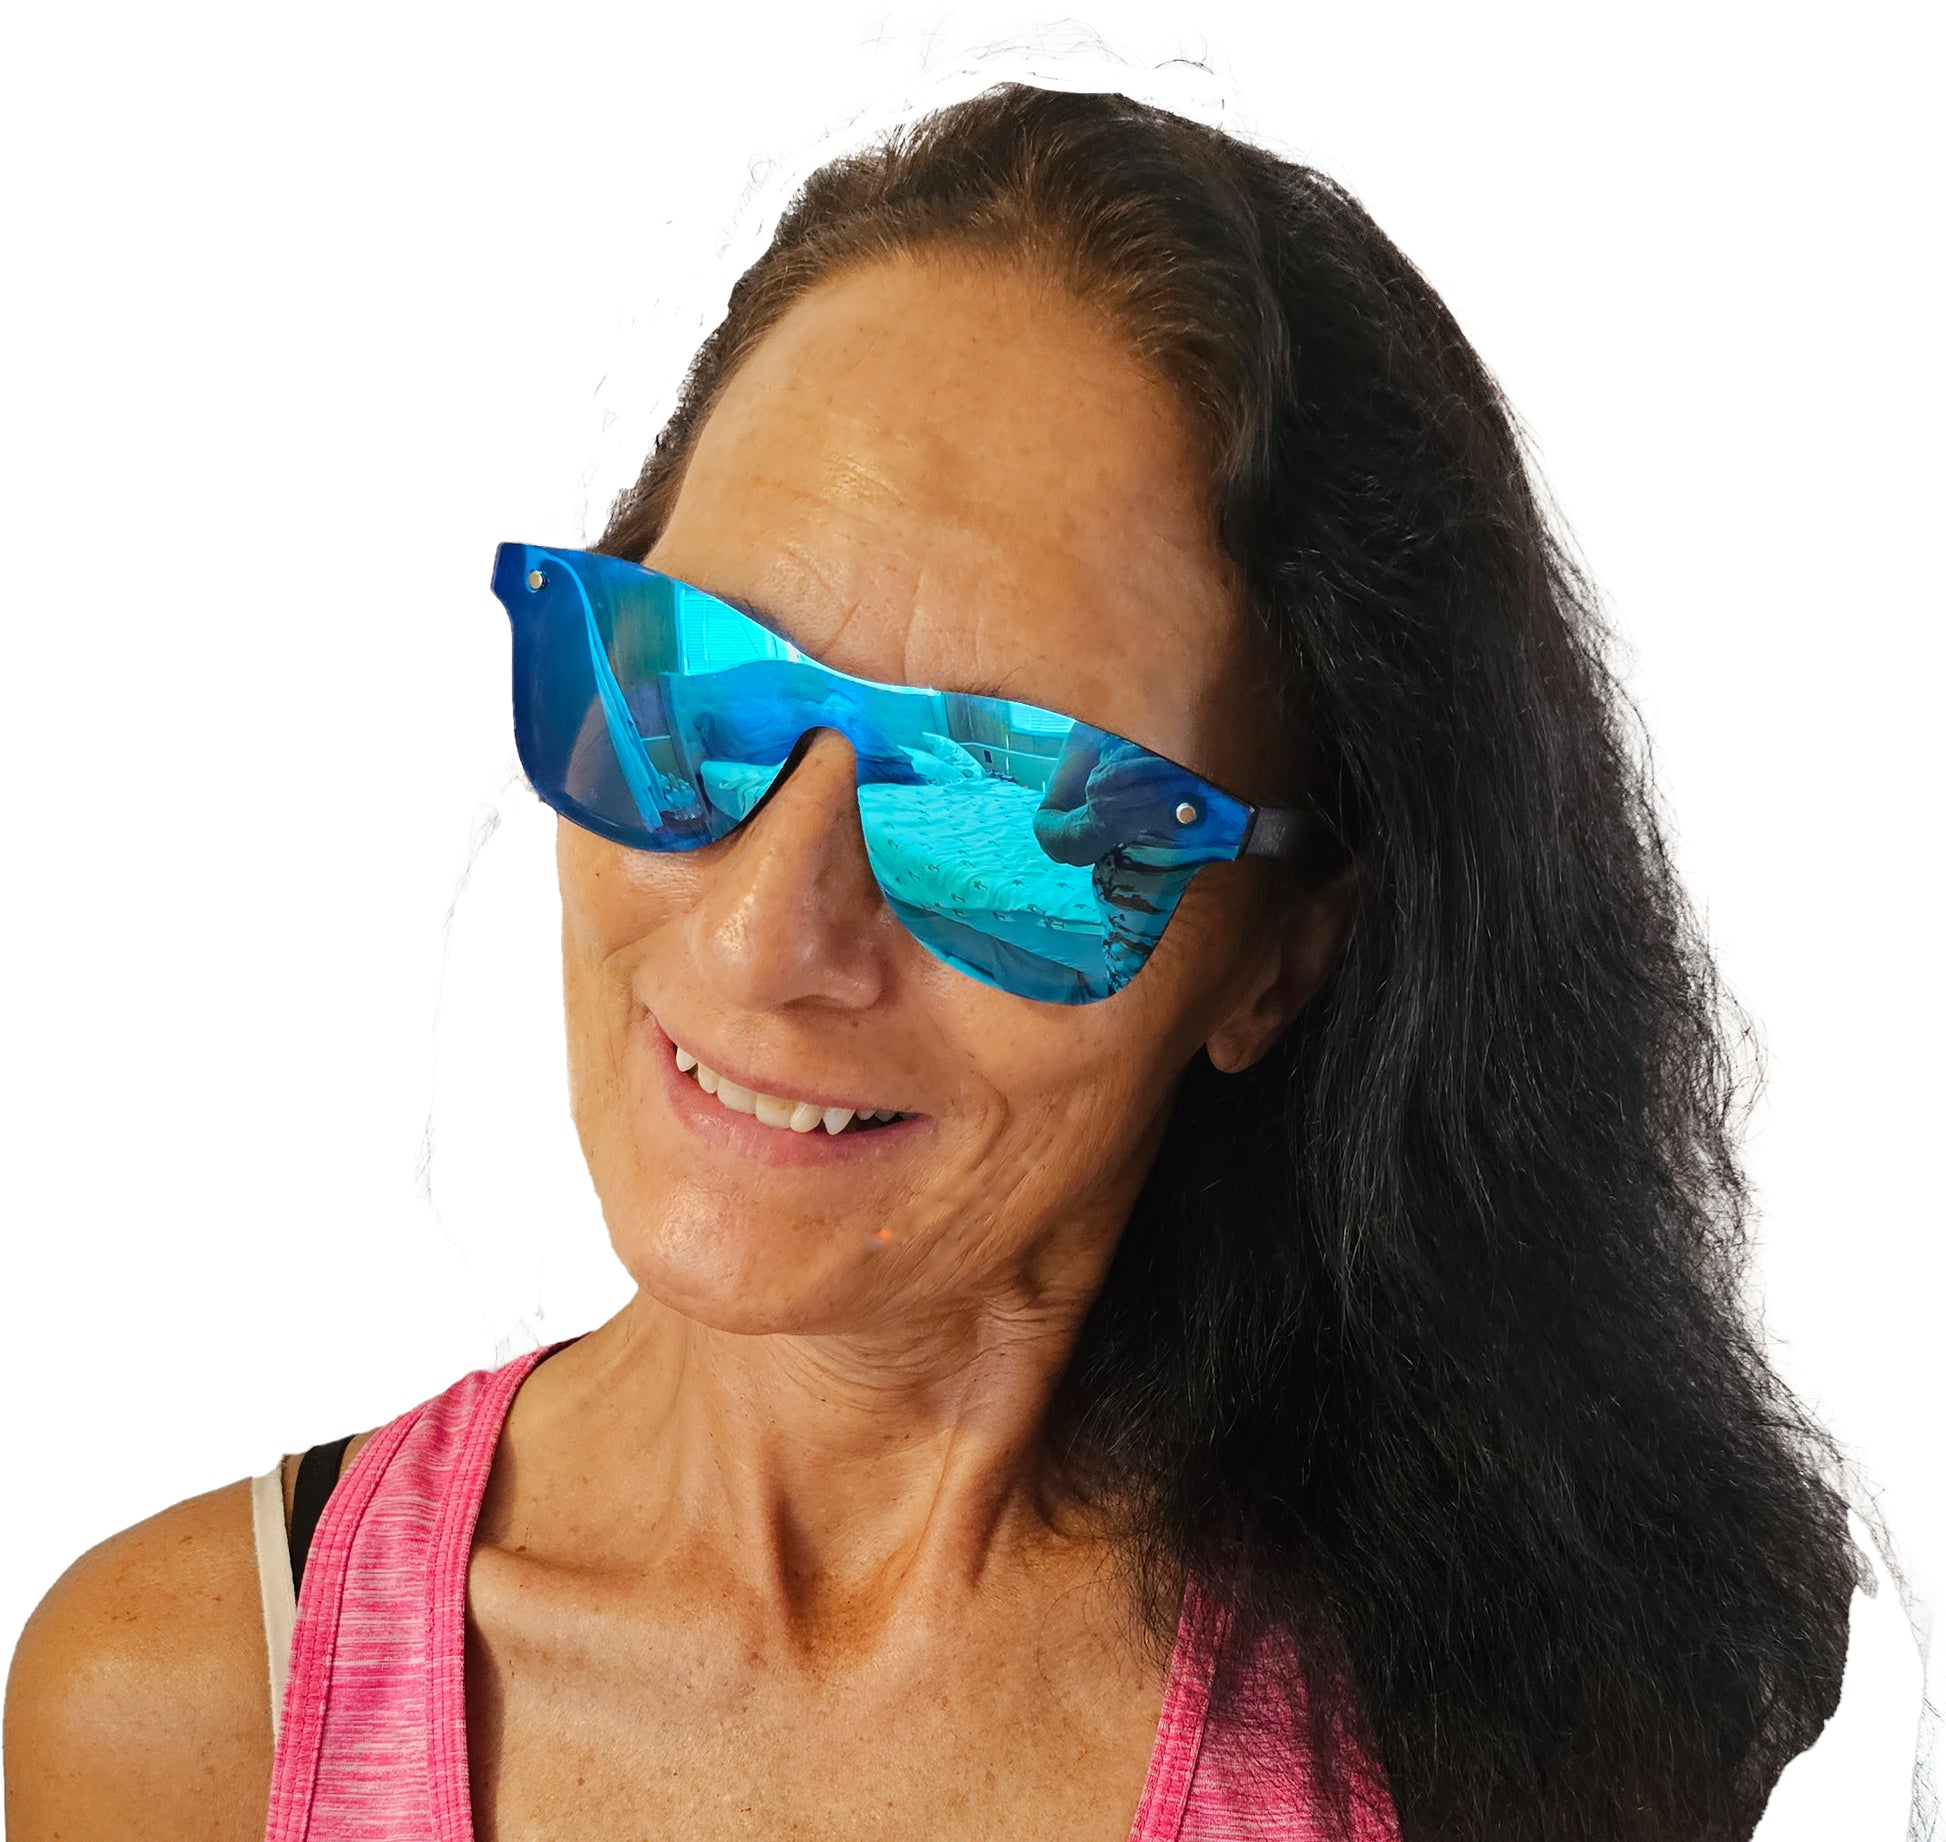 a woman with long black hair wearing blue sunglasses